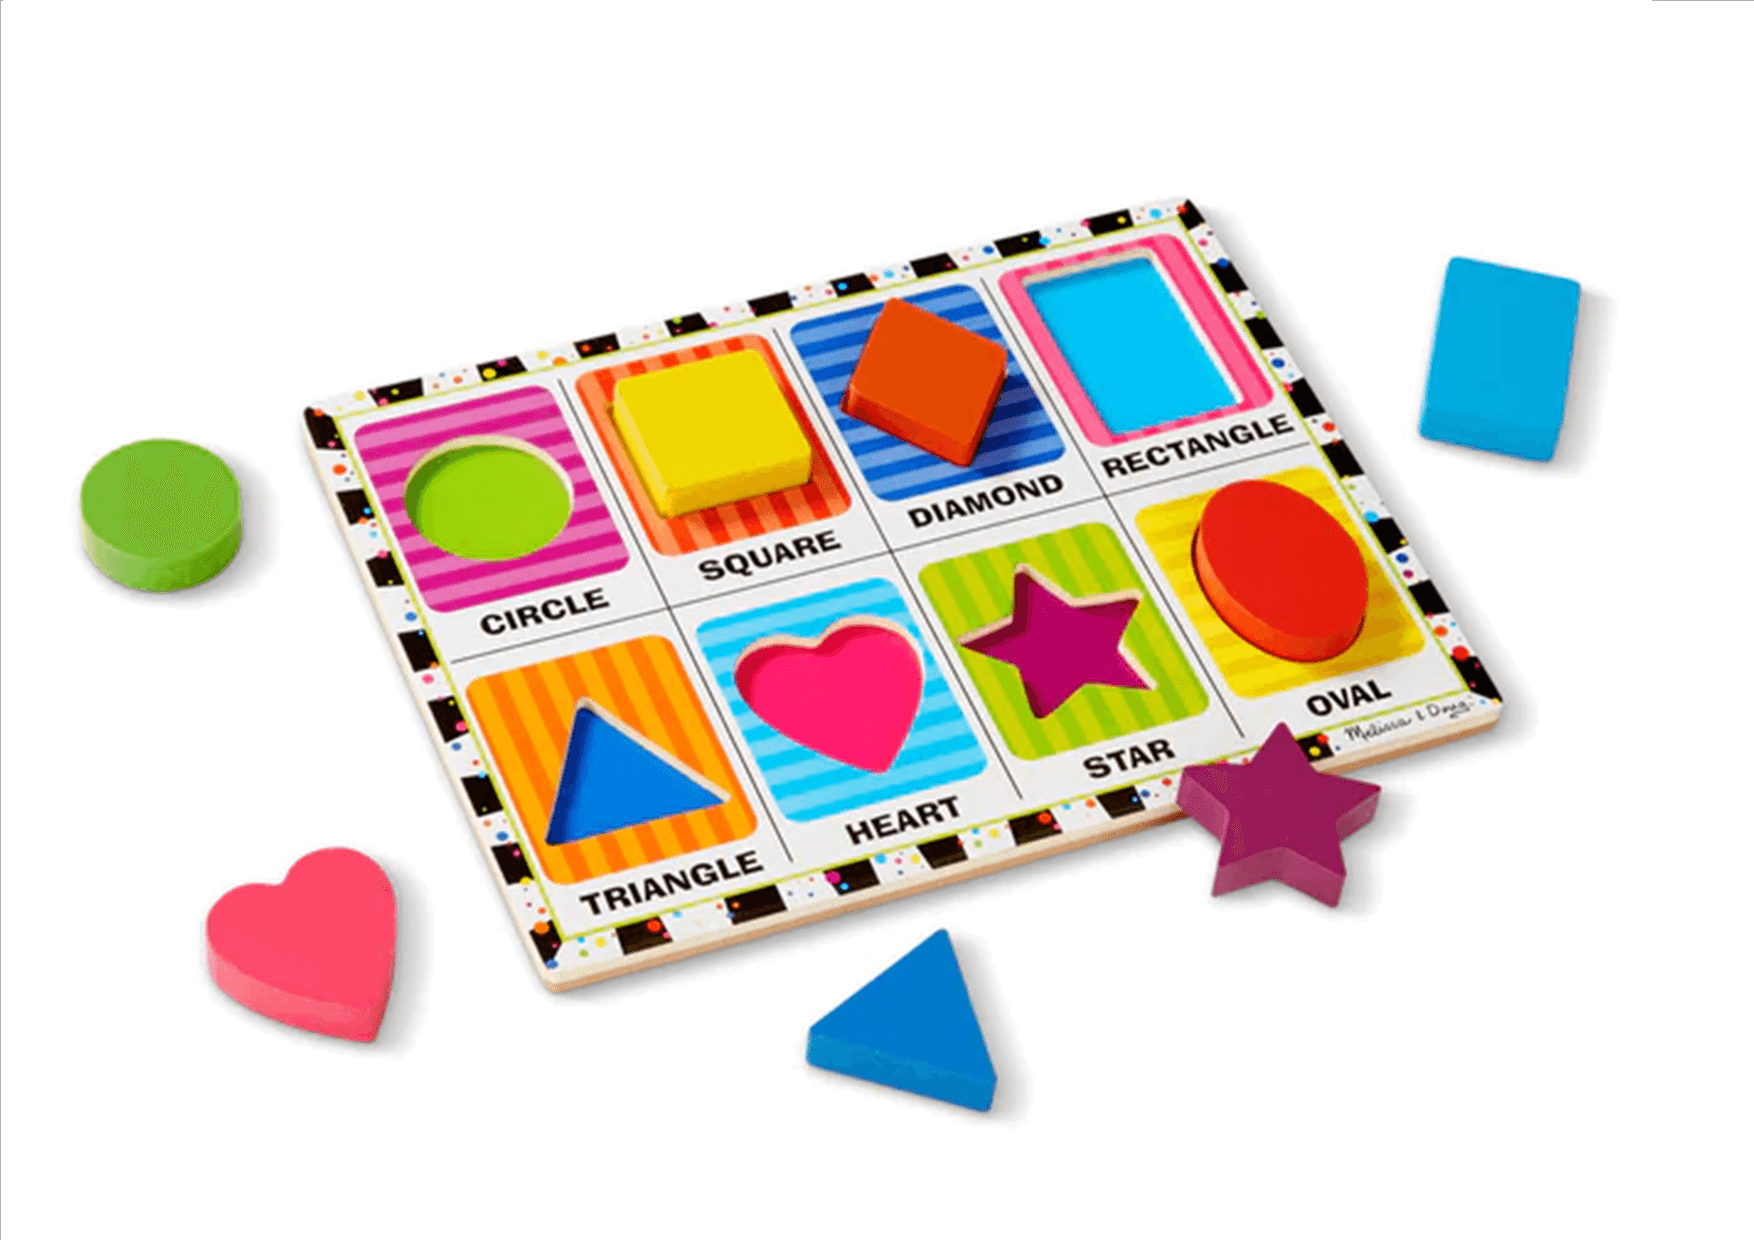 MELISSA & DOUG Puzzle Chunky Shapes: Encourages hand-eye coordination, fine motor skills and visual perception skills - M&D-3730